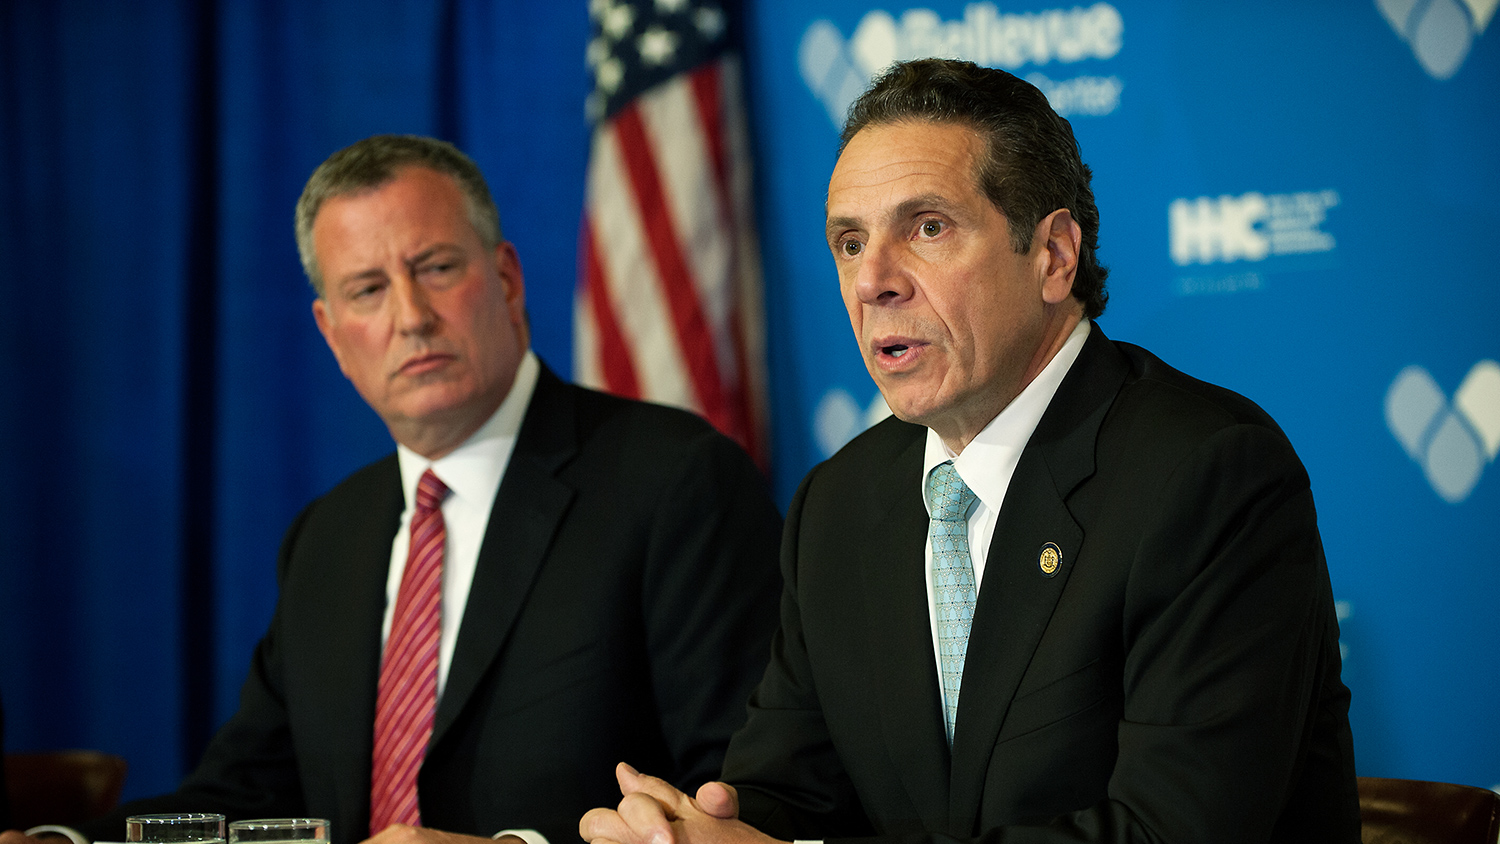 Mayor Bill de Blasio of New York City and Governor Andrew Cuomo of New York speak at a press conference October 23, 2014 in New York City.
